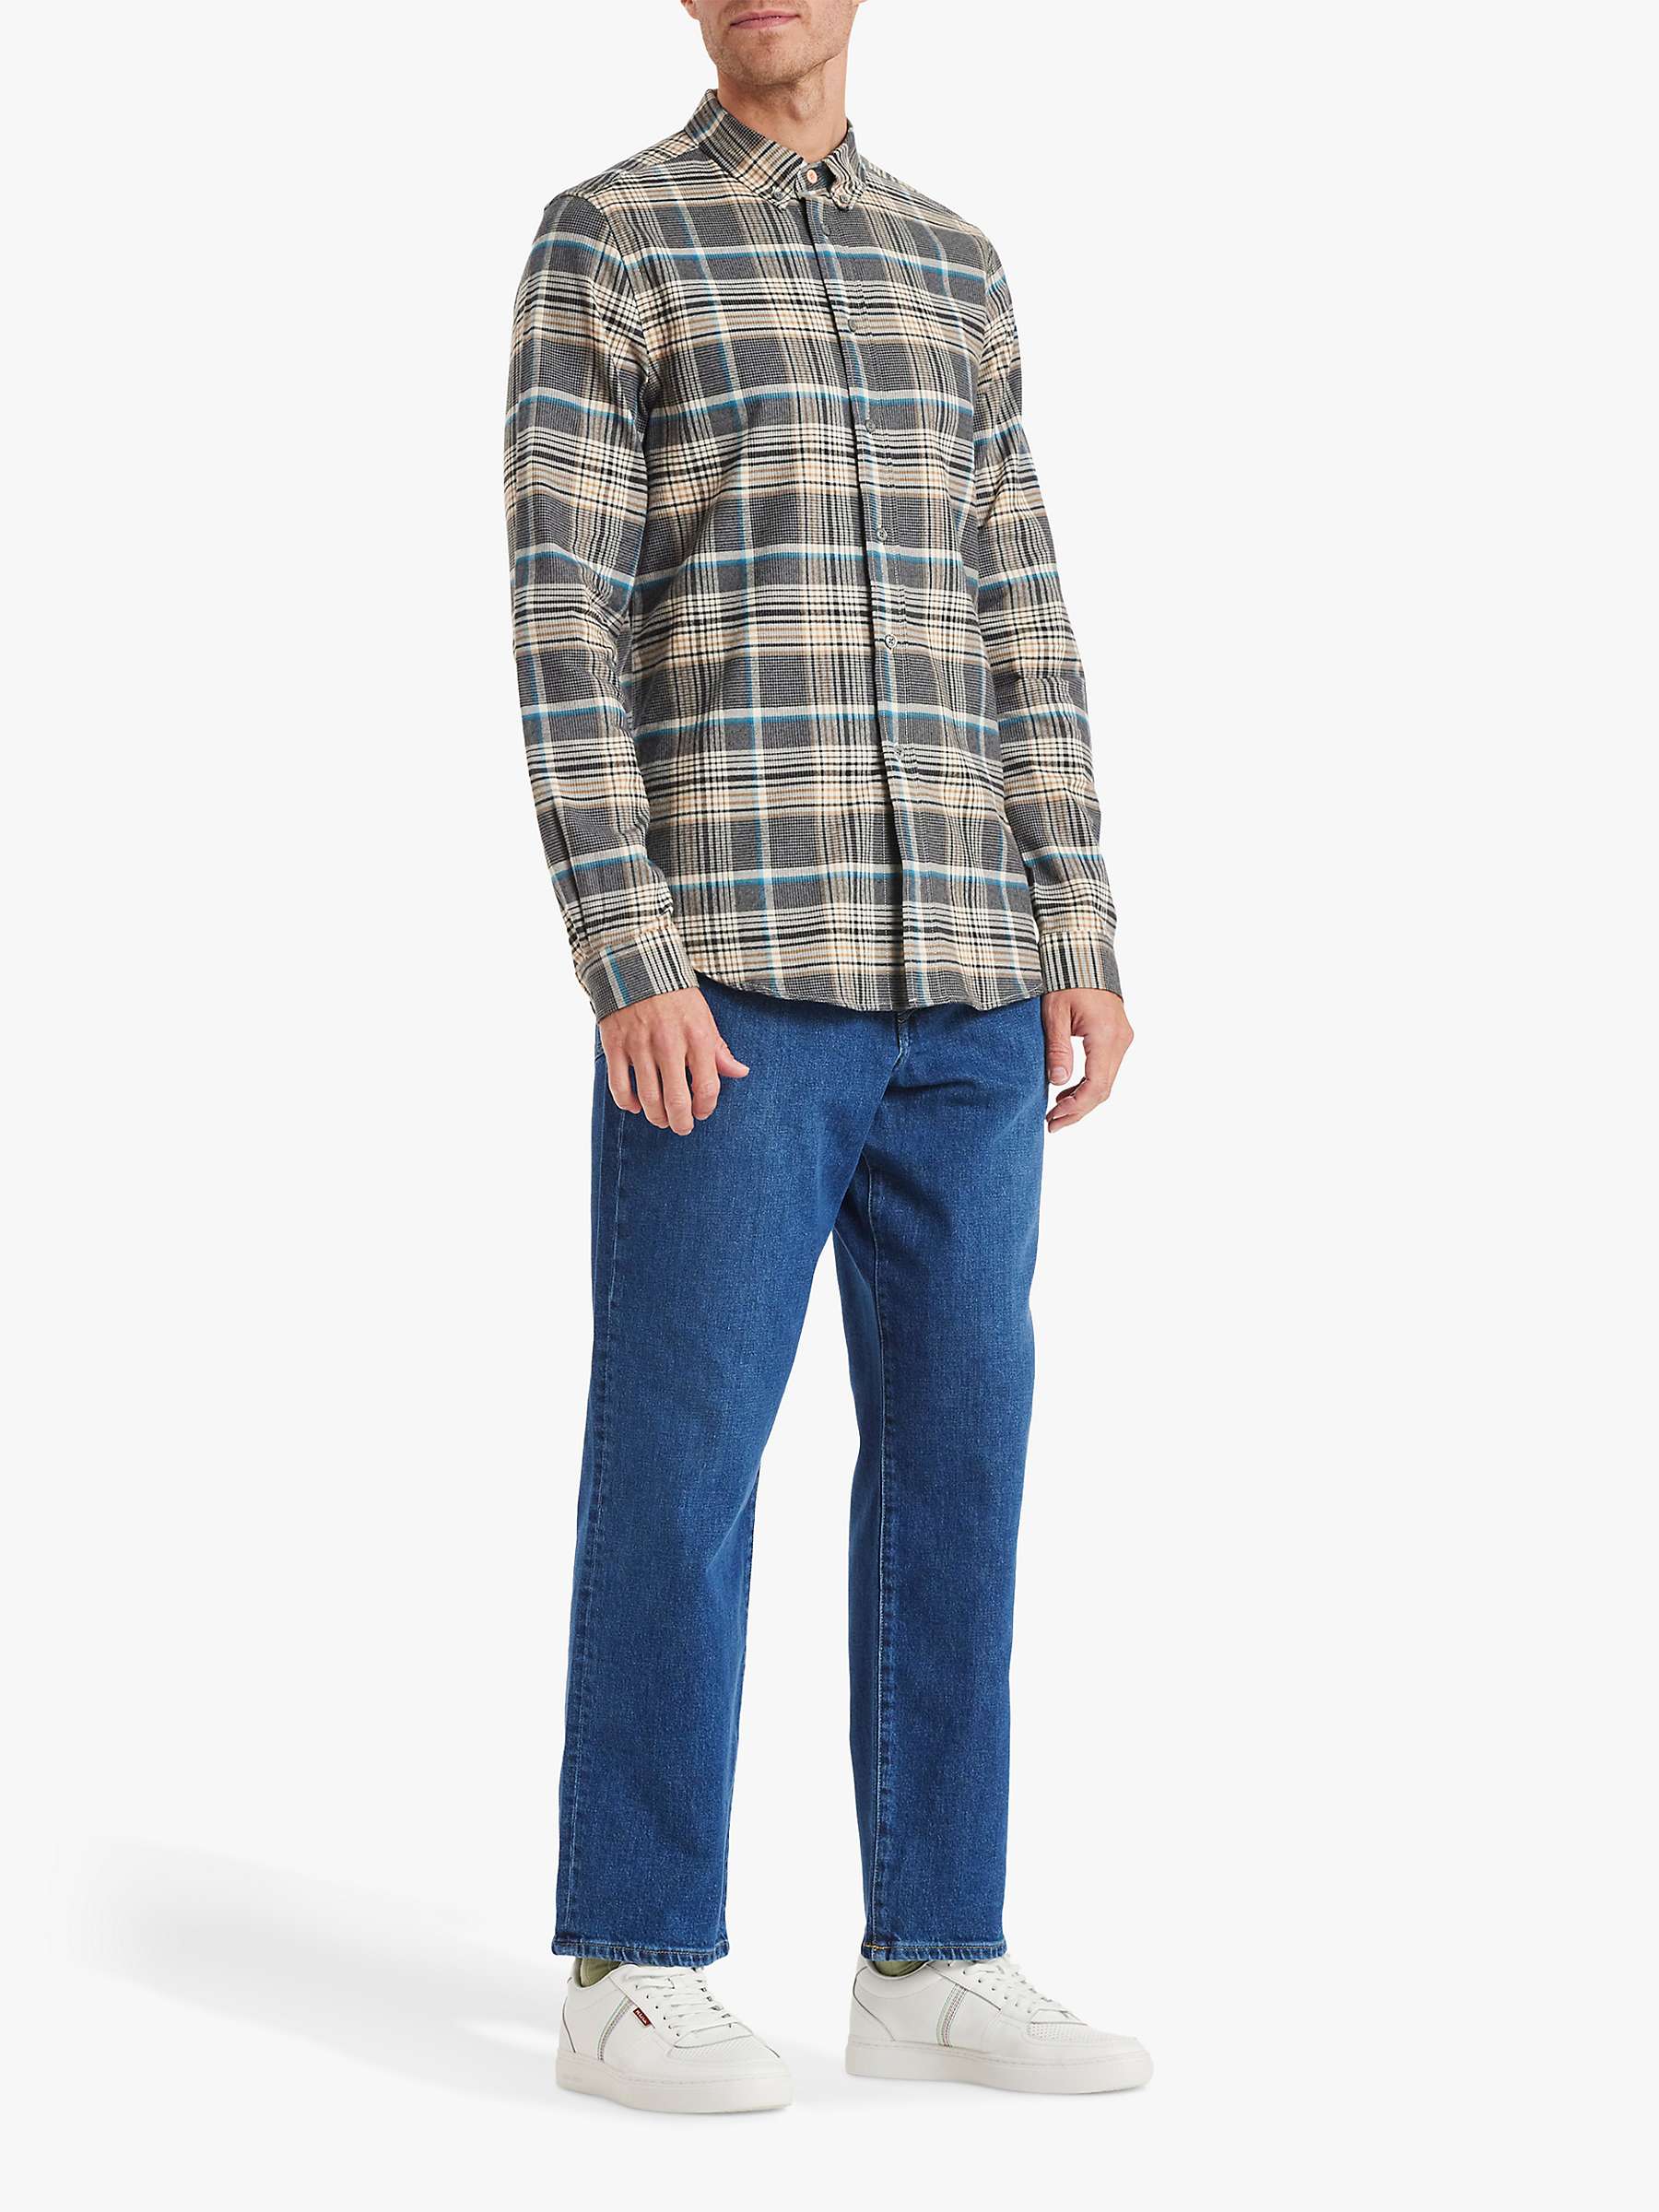 Buy Paul Smith Plaid Print Tailored Fit Shirt, Grey/Multi Online at johnlewis.com